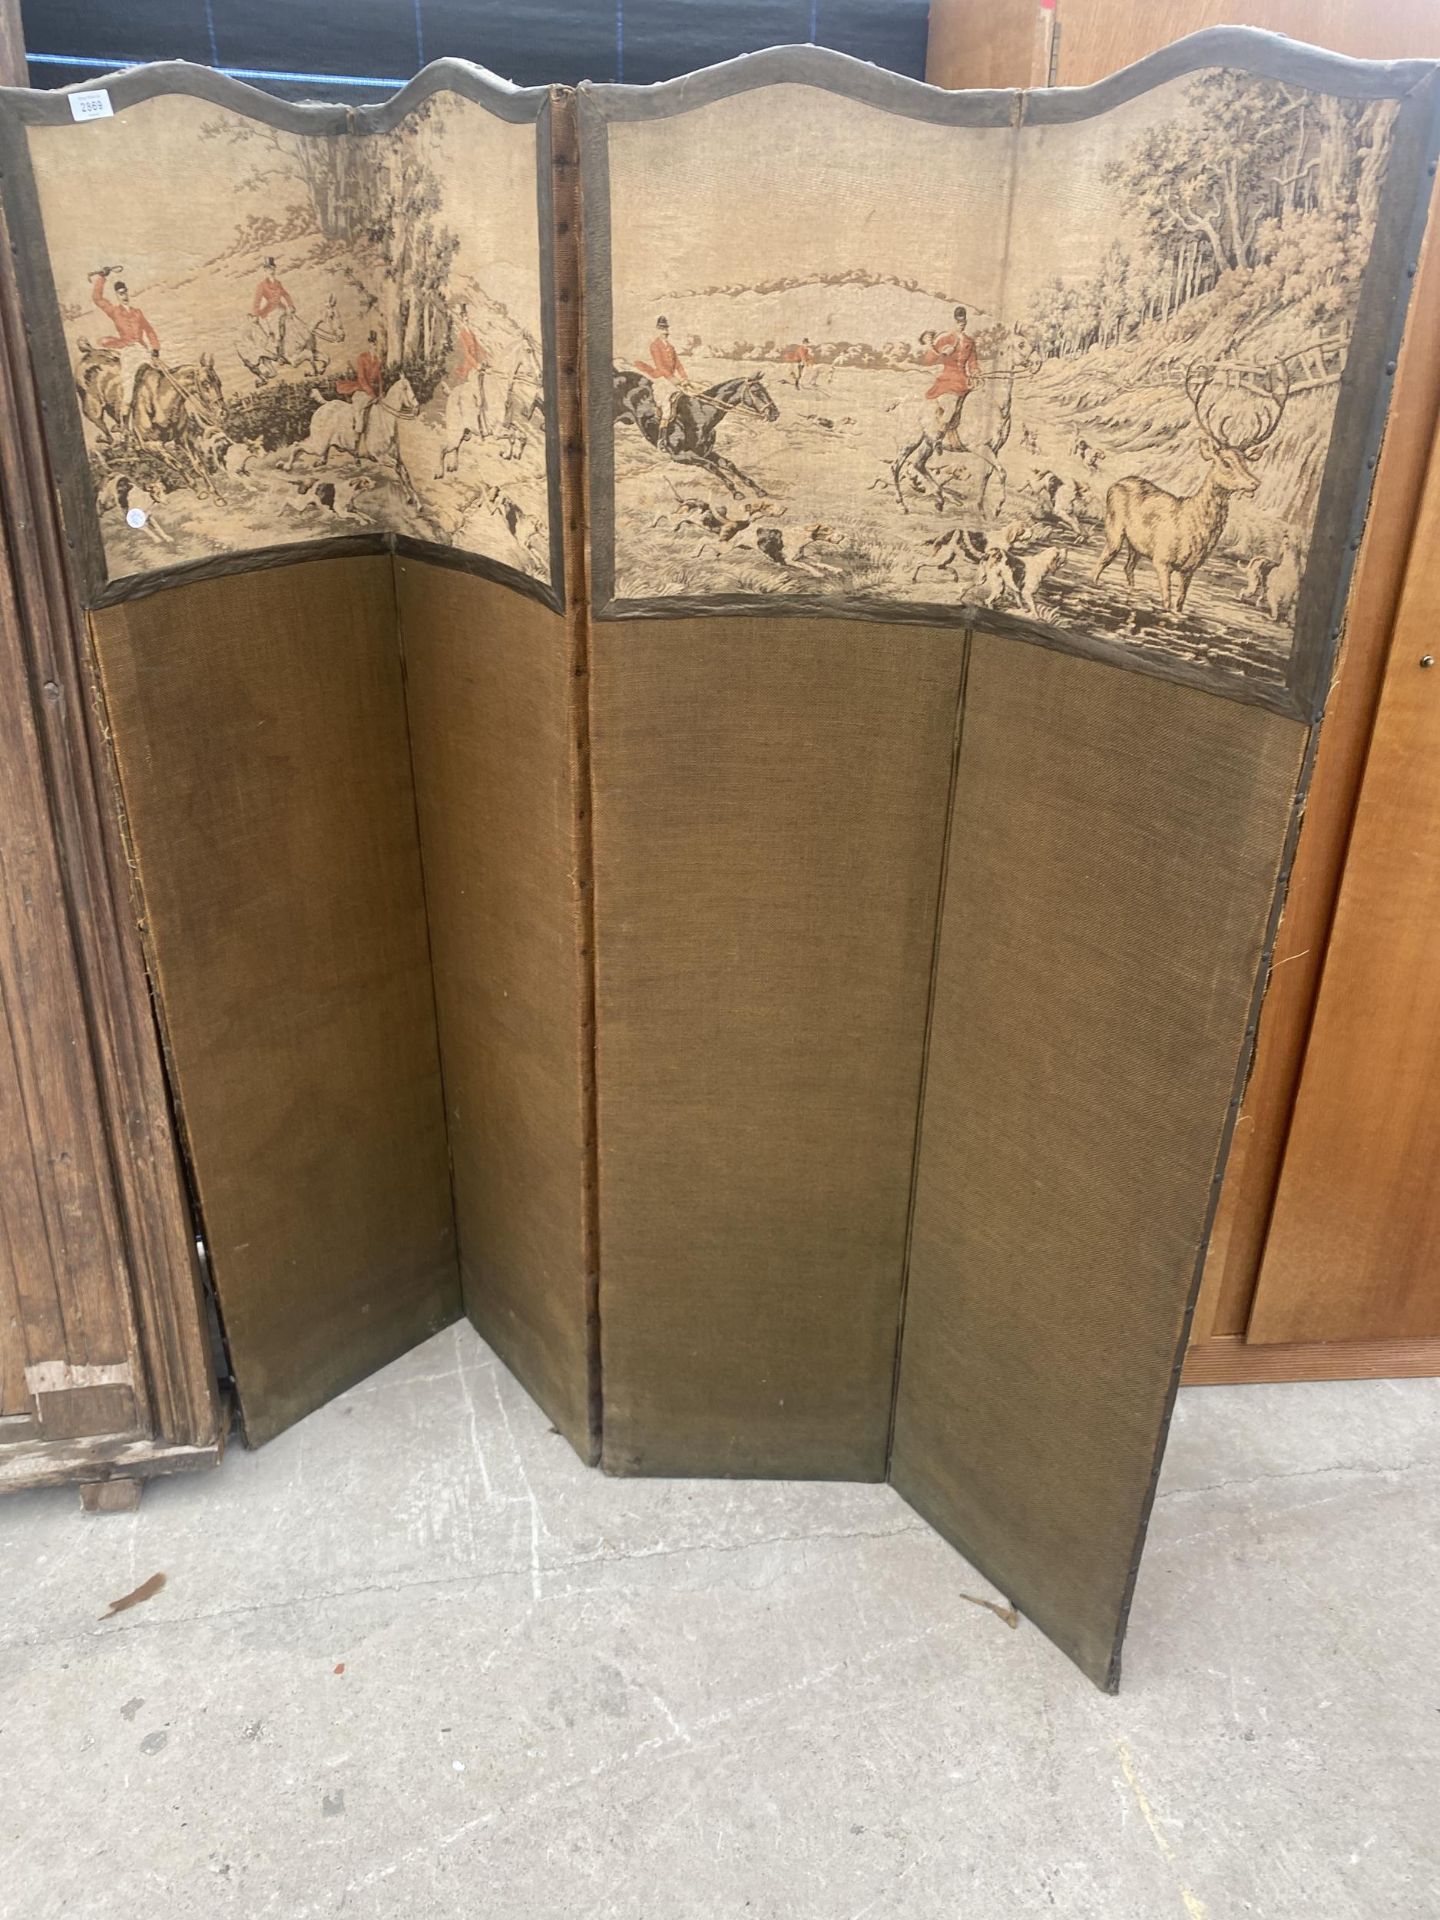 A FOUR DIVISION SCREEN DECORATED WITH HUNTING SCENES - Image 4 of 4